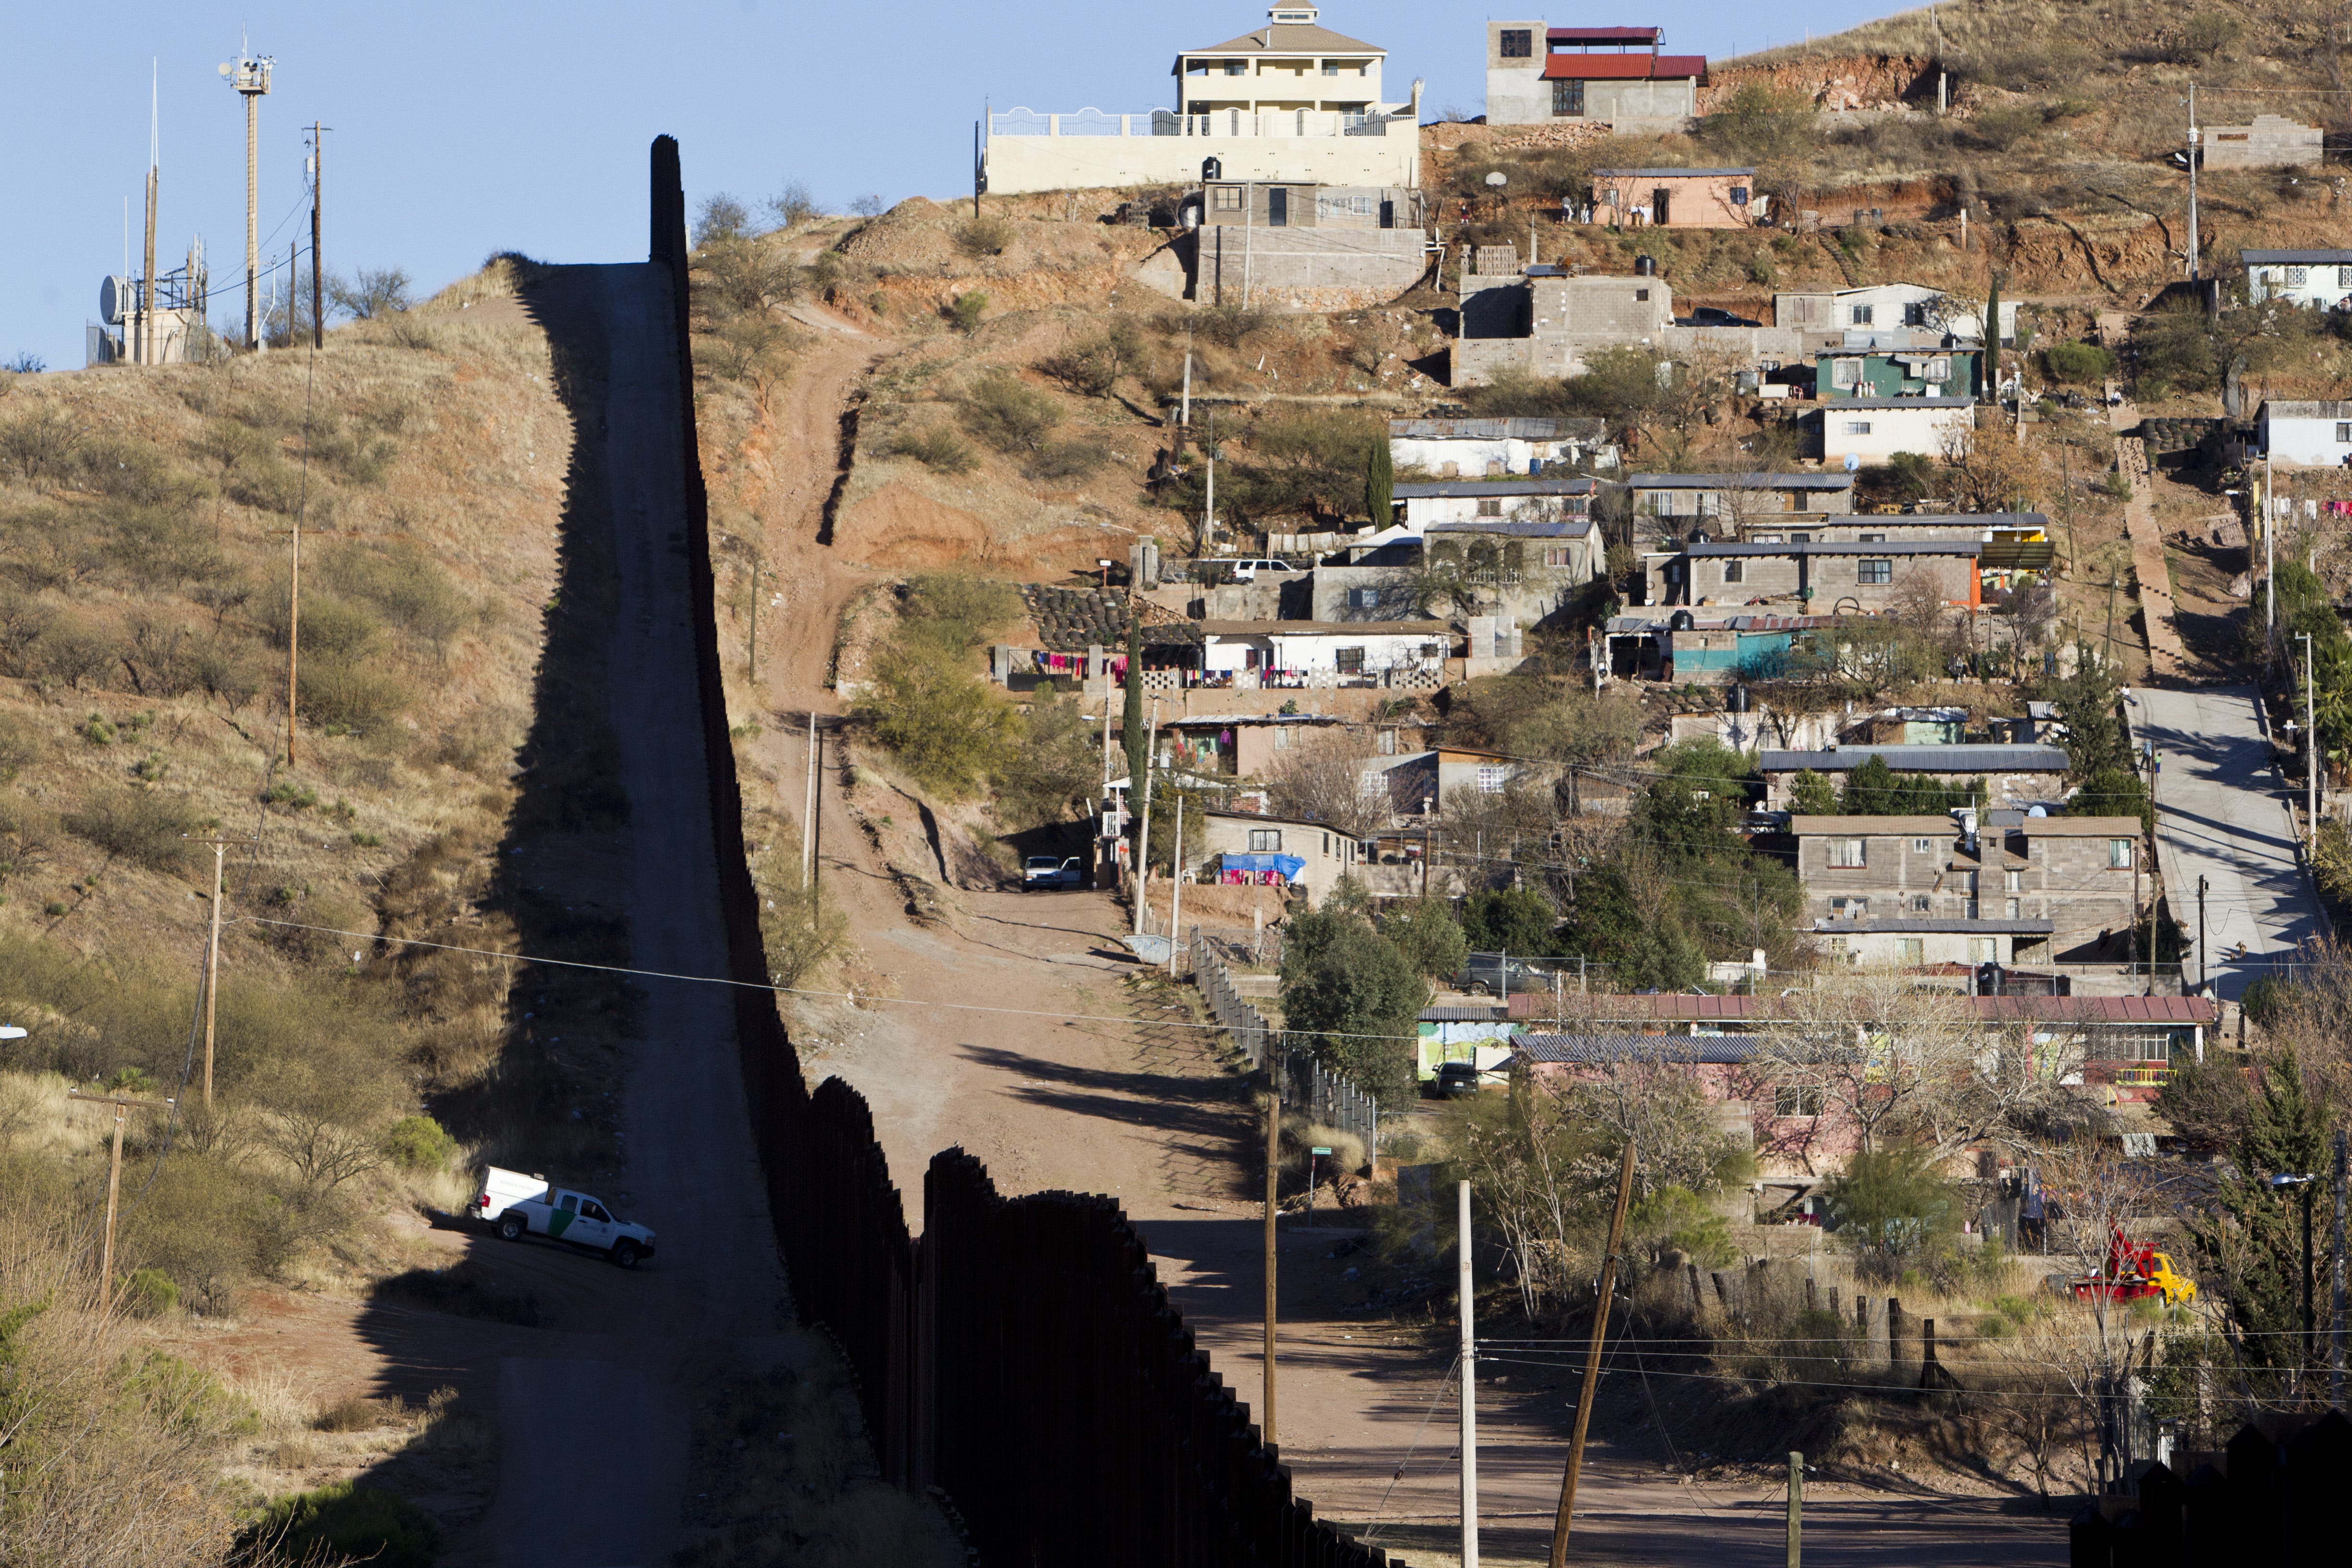 A federal judge has postponed until June 2017 the trial of a Border Patrol agent who killed a Mexican teen in Nogales. Shown is the border fence between Nogales, Arizona, and Nogales, Sonora.